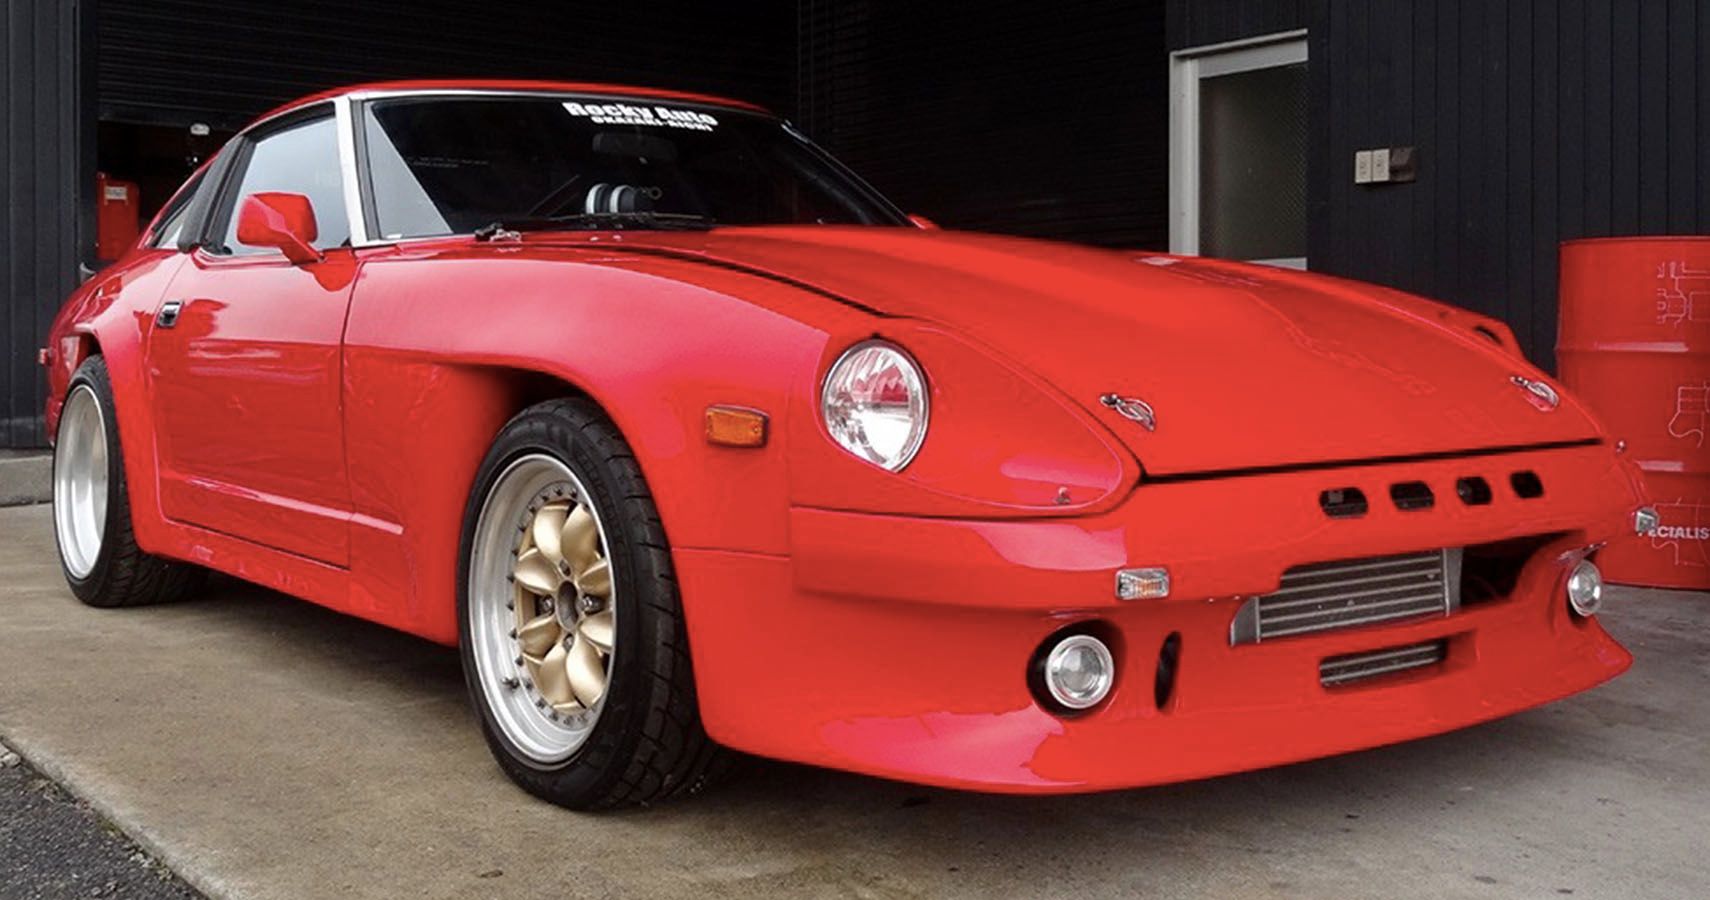 Check Out This JDM Nissan 280ZX With A Skyline GT-R Swap